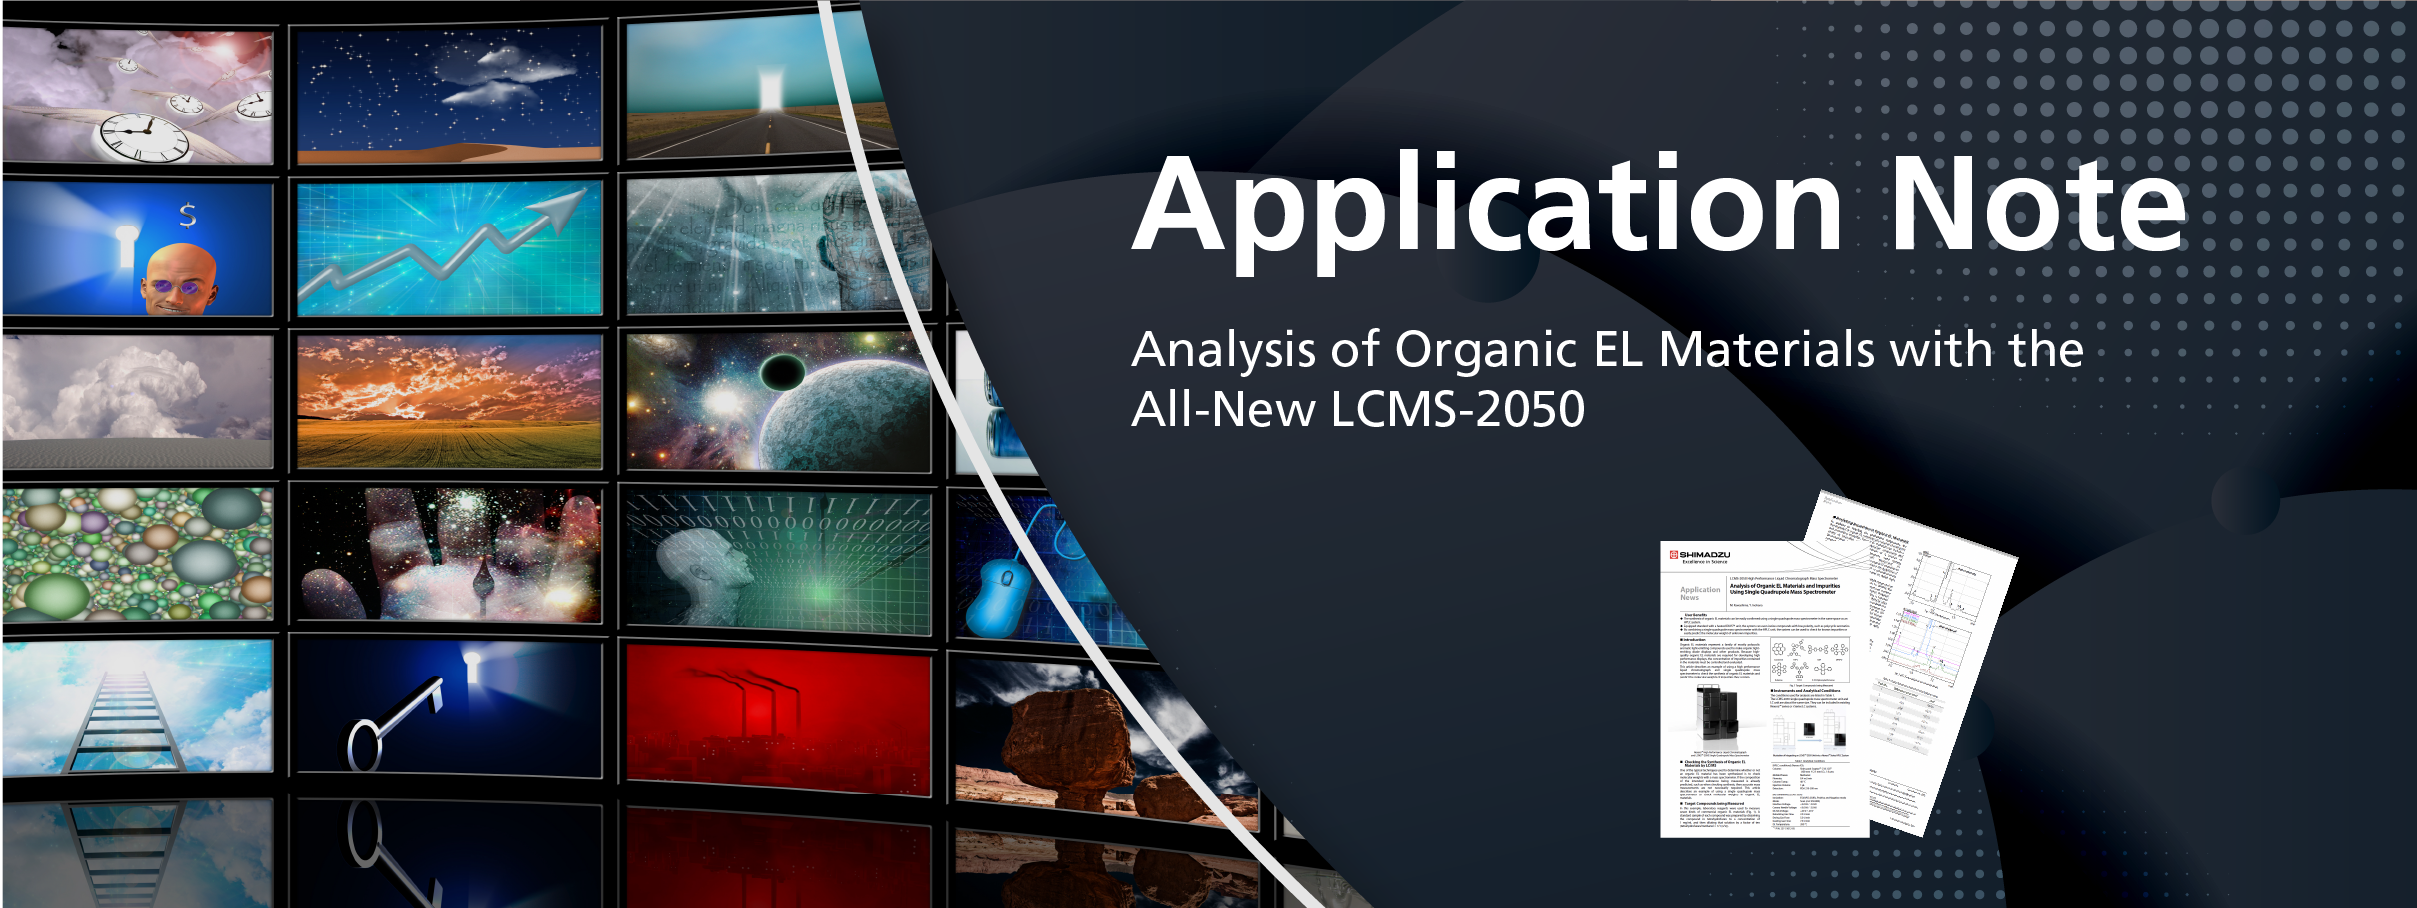 Analysis of Organic EL Materials with the All-New LCMS-2050